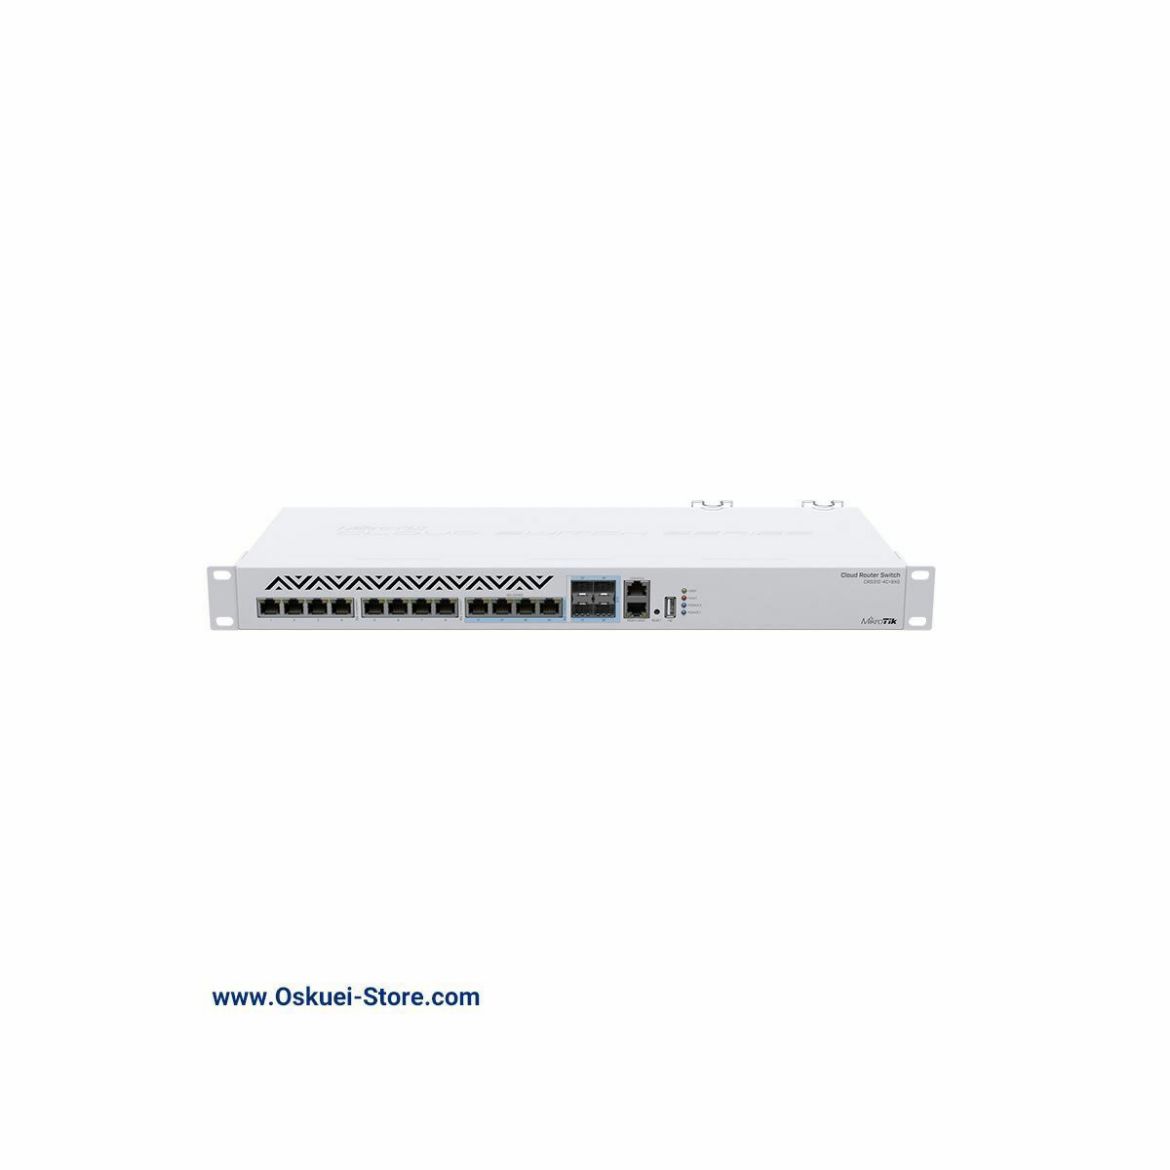 MikroTik CRS312-4C+8XG-RM Router Switch Front